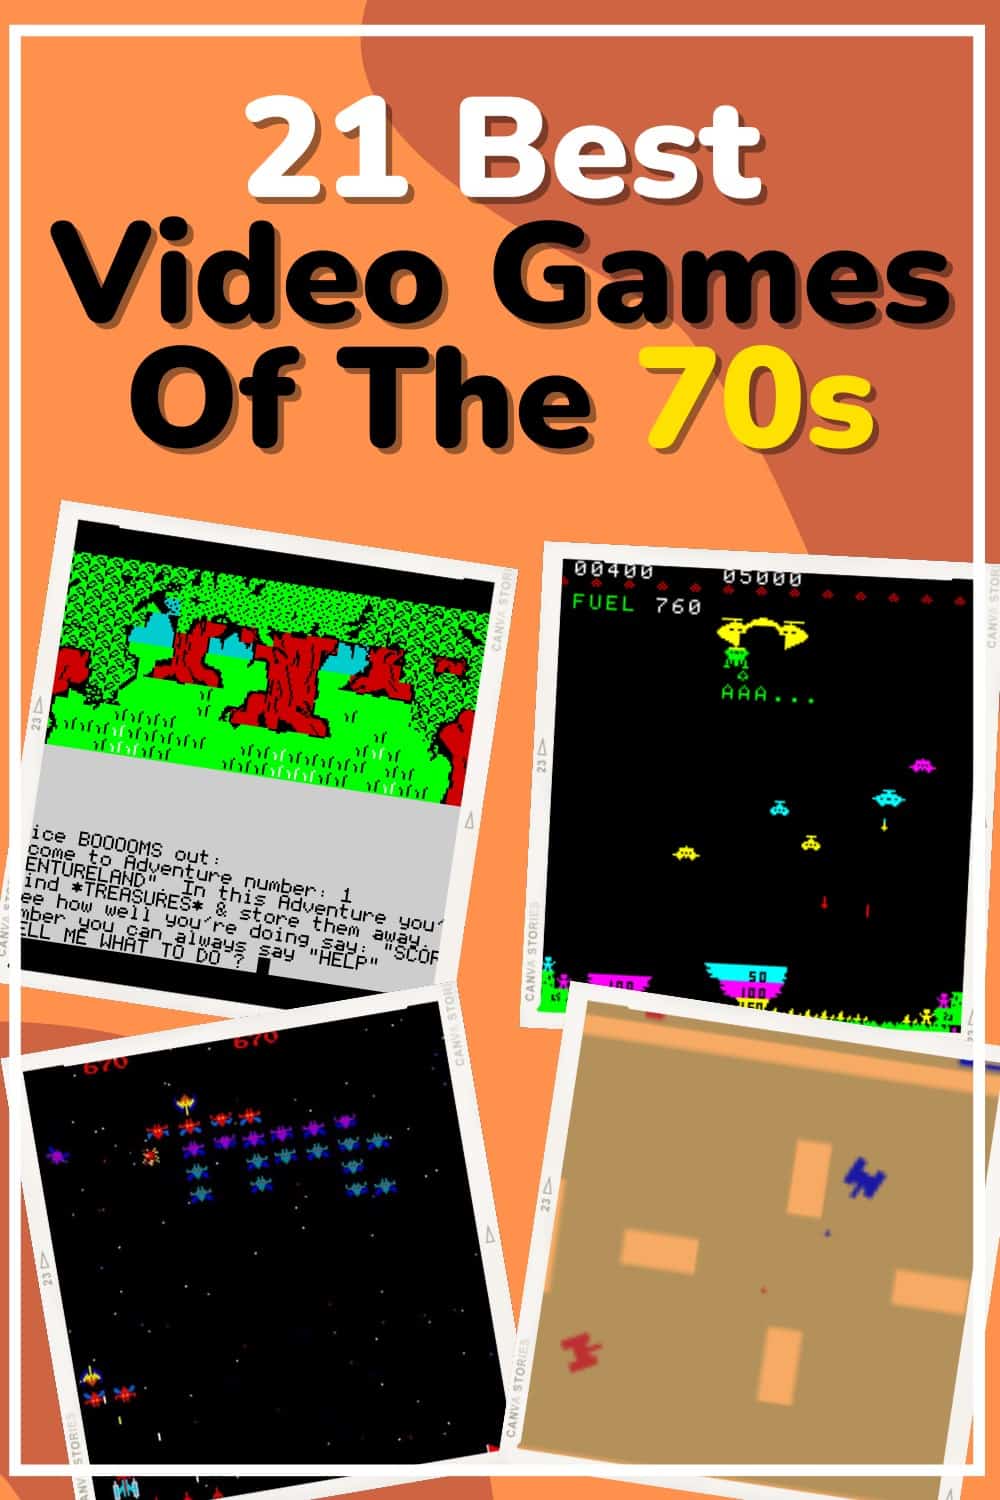 What were the best video games from the 1970s?